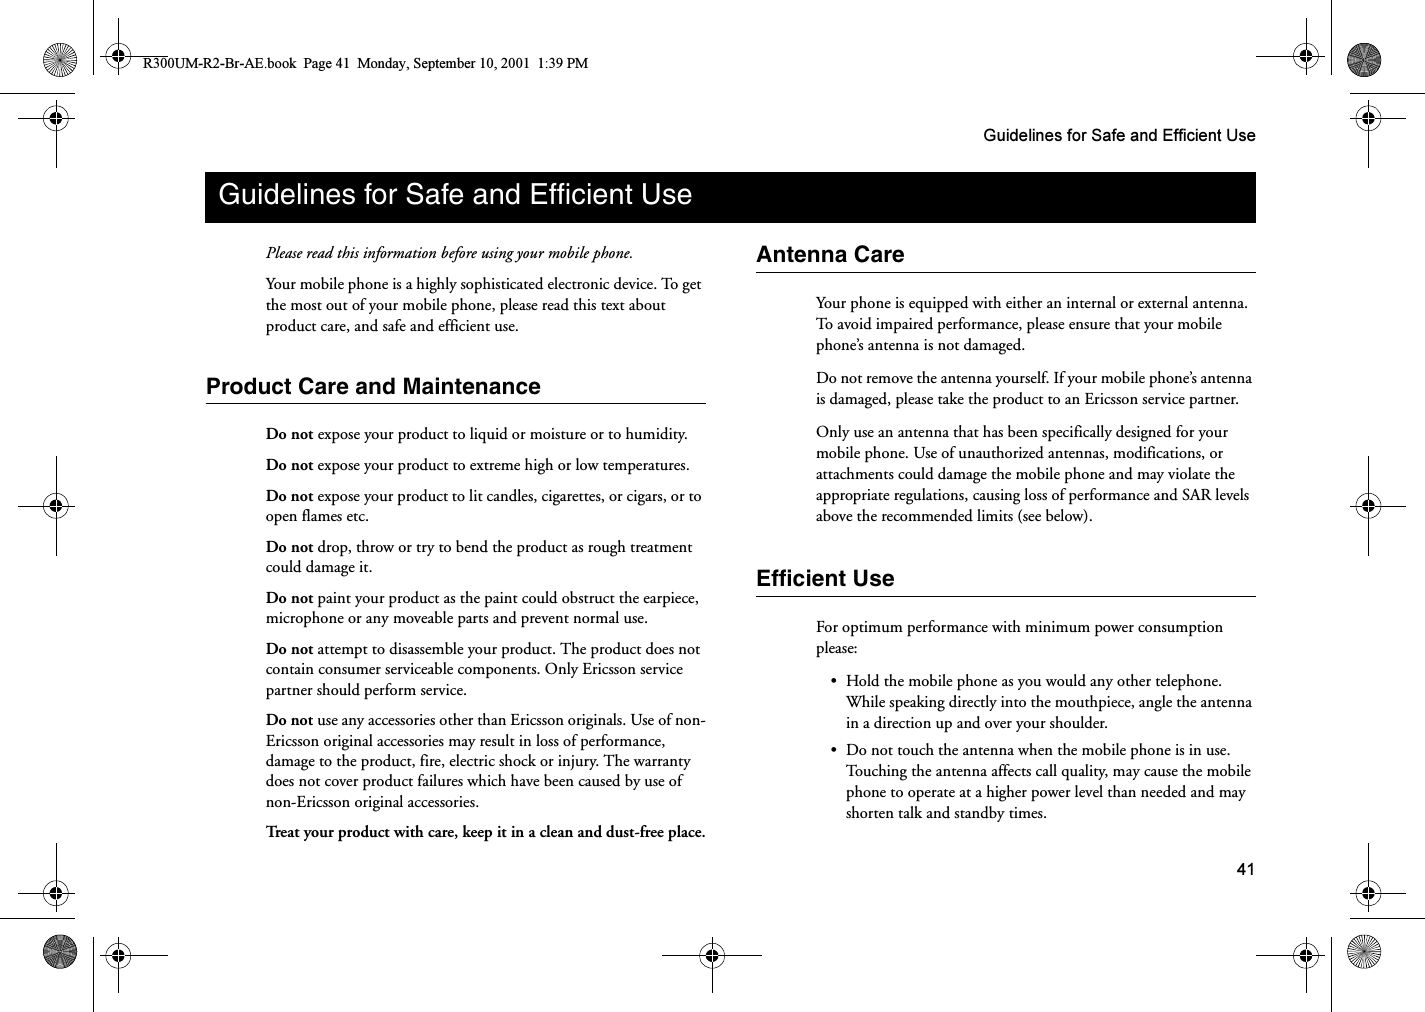 41Guidelines for Safe and Efficient UsePlease read this information before using your mobile phone.Your mobile phone is a highly sophisticated electronic device. To get the most out of your mobile phone, please read this text about product care, and safe and efficient use.Product Care and MaintenanceDo not expose your product to liquid or moisture or to humidity.Do not expose your product to extreme high or low temperatures.Do not expose your product to lit candles, cigarettes, or cigars, or to open flames etc.Do not drop, throw or try to bend the product as rough treatment could damage it.Do not paint your product as the paint could obstruct the earpiece, microphone or any moveable parts and prevent normal use.Do not attempt to disassemble your product. The product does not contain consumer serviceable components. Only Ericsson service partner should perform service.Do not use any accessories other than Ericsson originals. Use of non-Ericsson original accessories may result in loss of performance, damage to the product, fire, electric shock or injury. The warranty does not cover product failures which have been caused by use of non-Ericsson original accessories.Treat your product with care, keep it in a clean and dust-free place.Antenna CareYour phone is equipped with either an internal or external antenna. To avoid impaired performance, please ensure that your mobile phone’s antenna is not damaged.Do not remove the antenna yourself. If your mobile phone’s antenna is damaged, please take the product to an Ericsson service partner.Only use an antenna that has been specifically designed for your mobile phone. Use of unauthorized antennas, modifications, or attachments could damage the mobile phone and may violate the appropriate regulations, causing loss of performance and SAR levels above the recommended limits (see below).Efficient UseFor optimum performance with minimum power consumption please:•Hold the mobile phone as you would any other telephone. While speaking directly into the mouthpiece, angle the antenna in a direction up and over your shoulder.•Do not touch the antenna when the mobile phone is in use. Touching the antenna affects call quality, may cause the mobile phone to operate at a higher power level than needed and may shorten talk and standby times.Guidelines for Safe and Efficient UseR300UM-R2-Br-AE.book  Page 41  Monday, September 10, 2001  1:39 PM